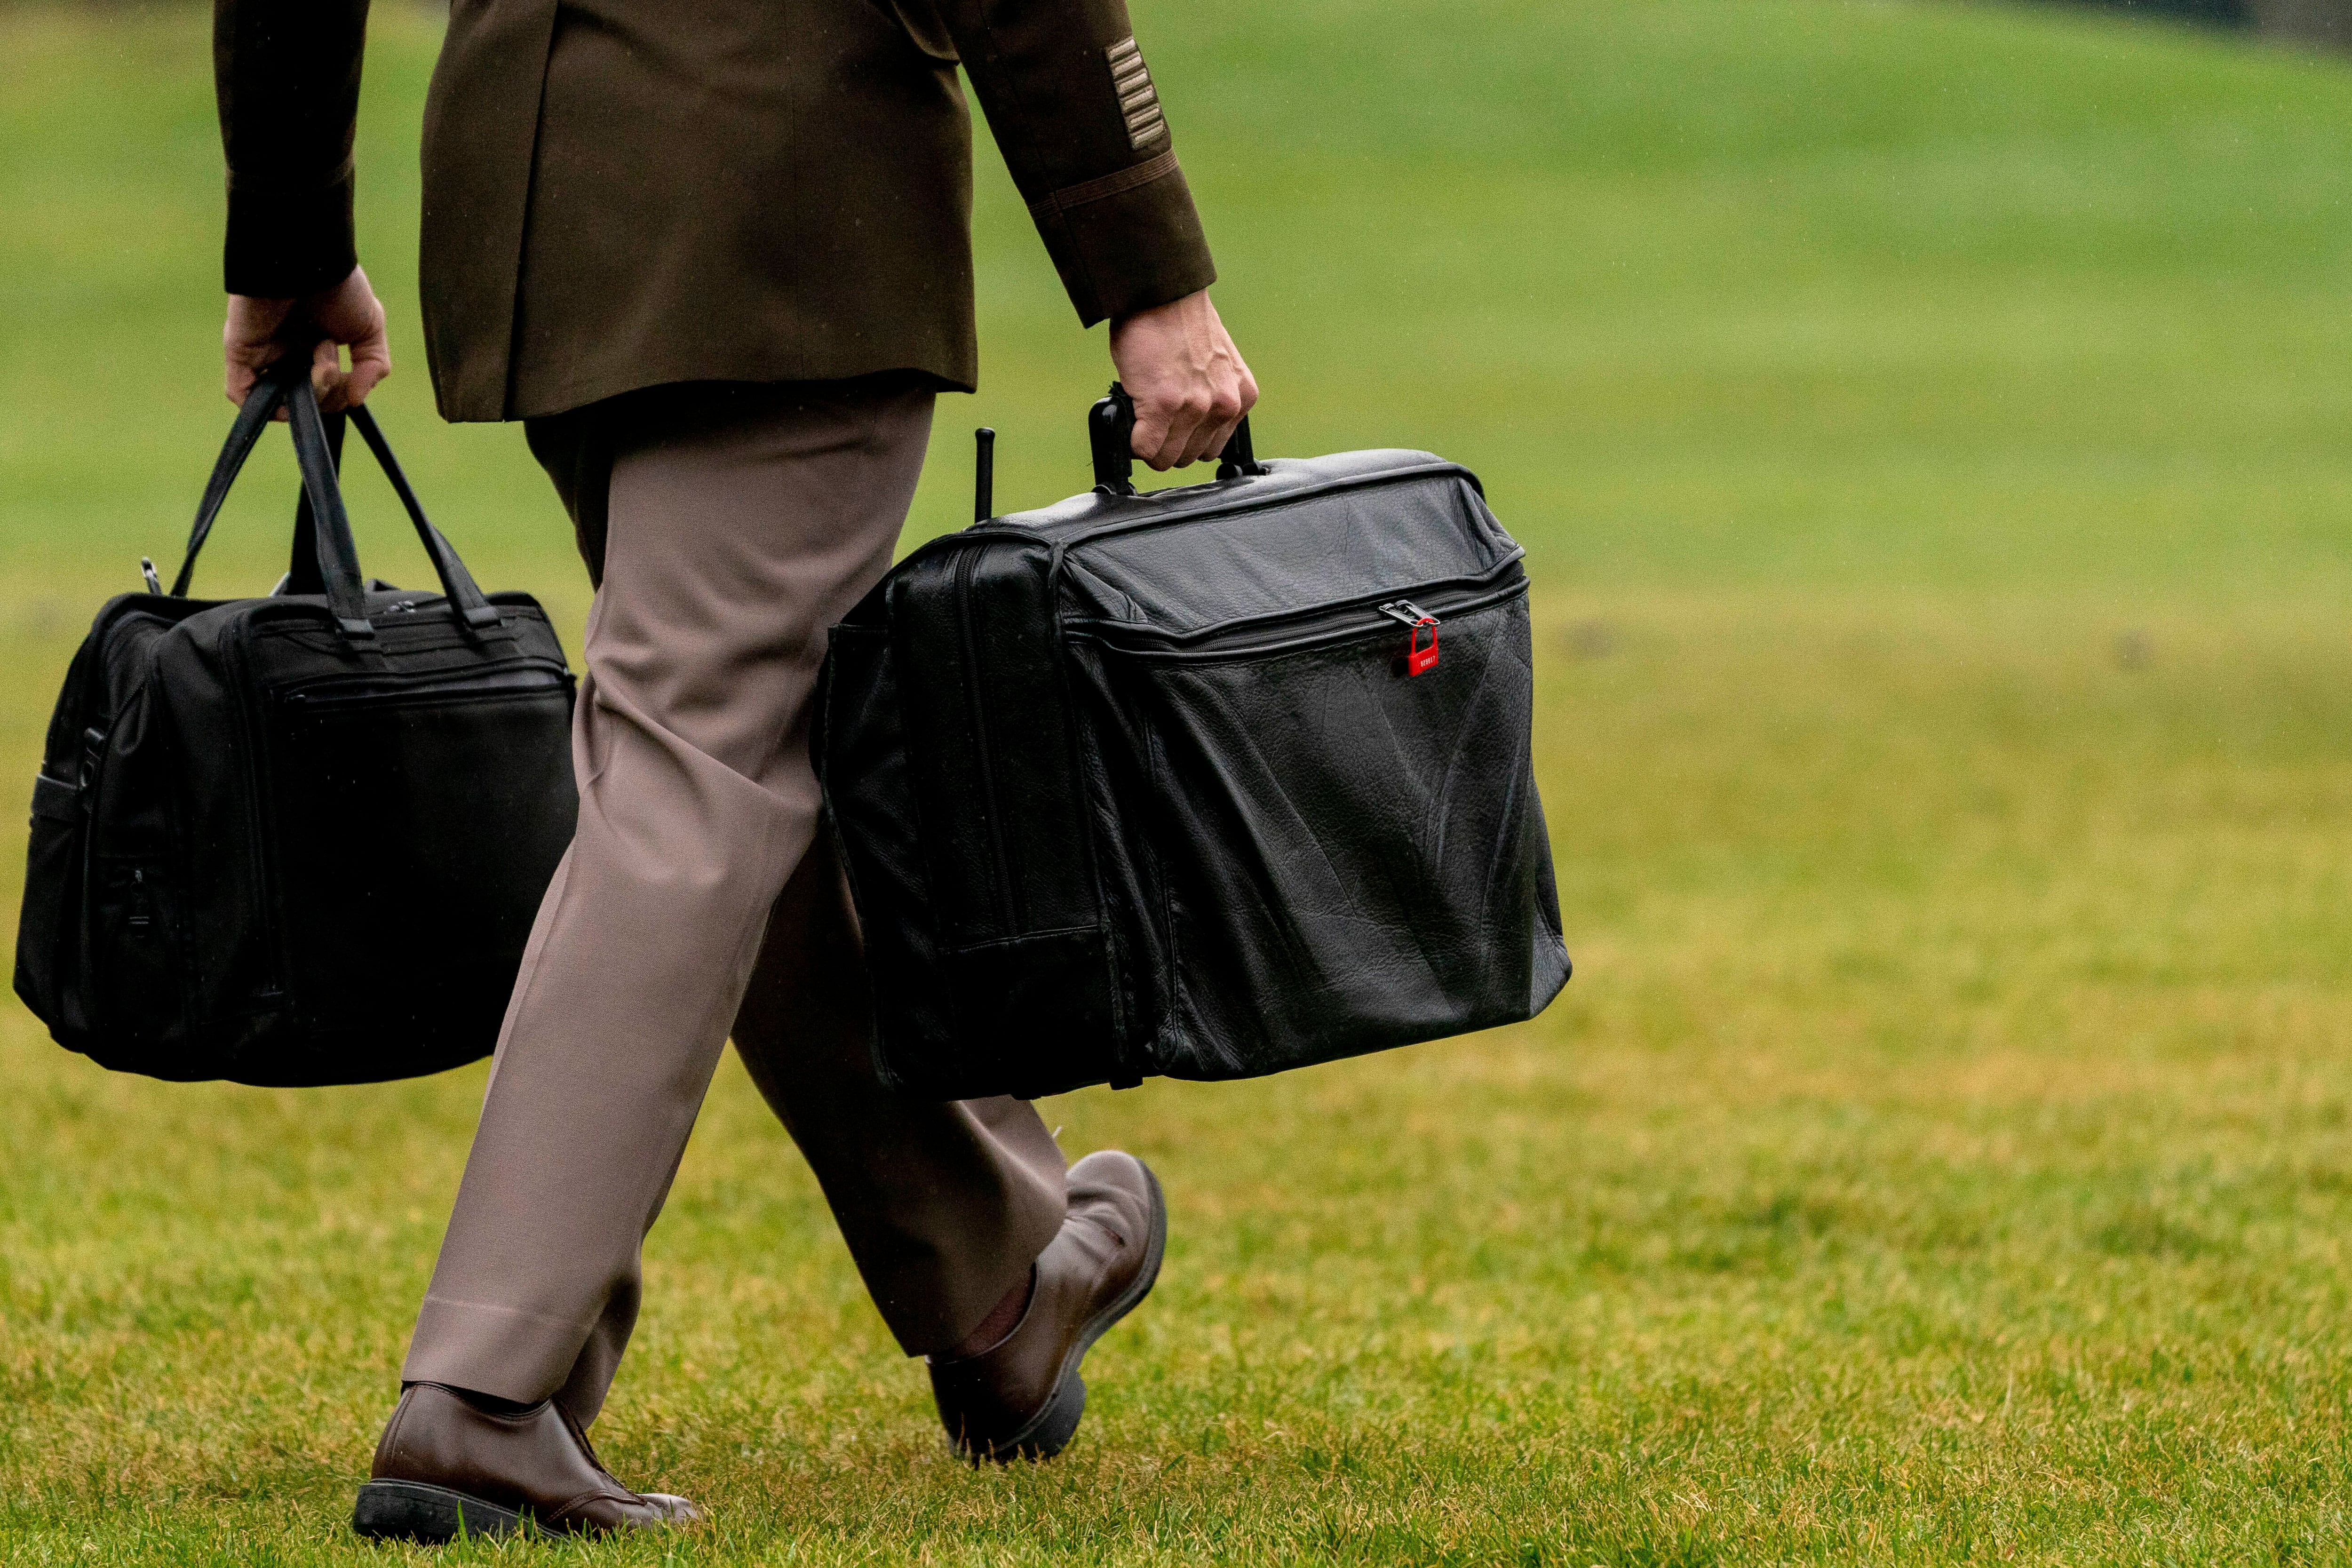 How the 'nuclear football' remains a potent symbol of the unthinkable